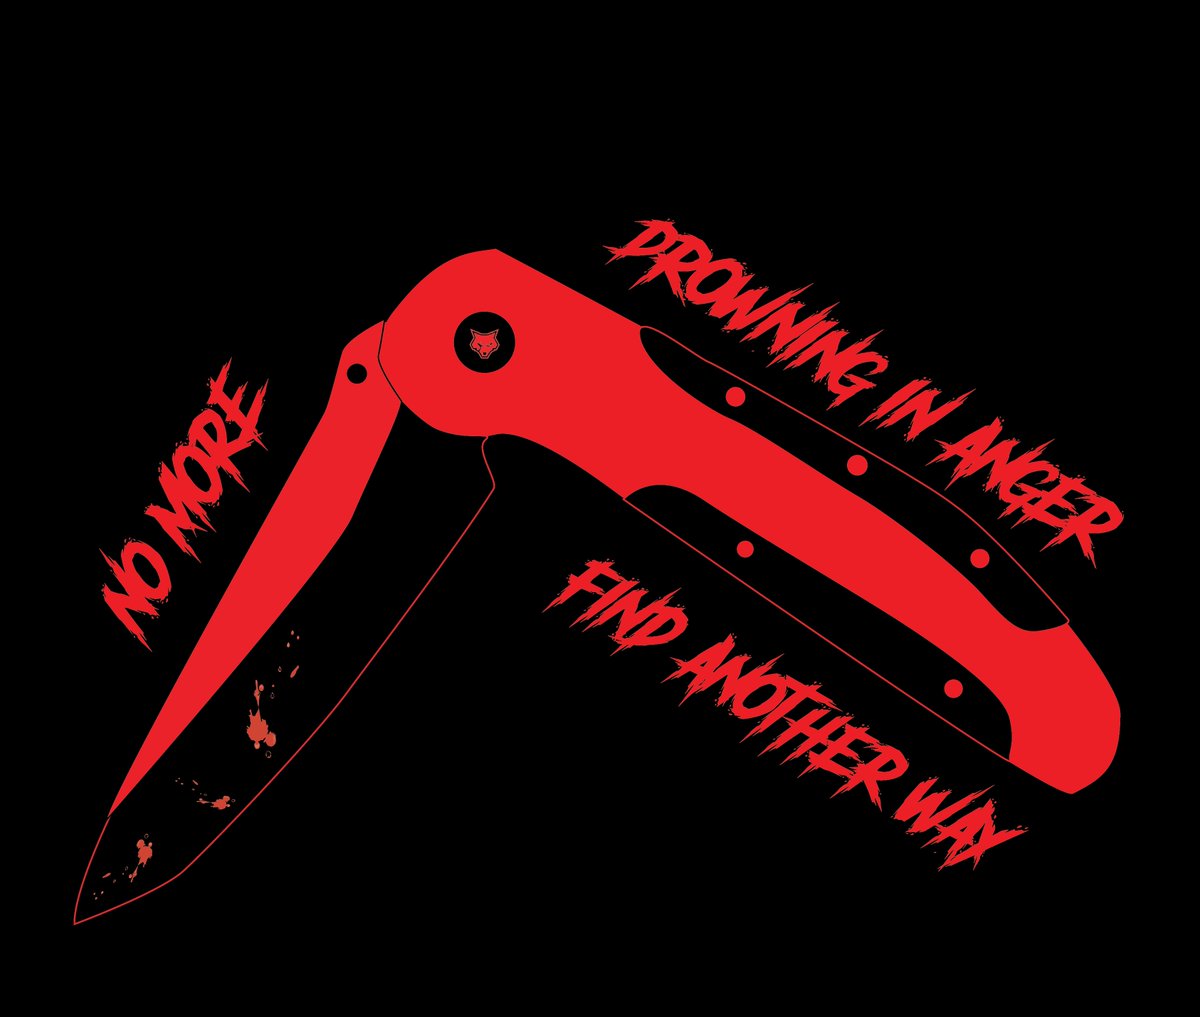 'No more drowning in anger
Find another way' 

It's been a whole week since I saw @badwolves live and I can't stop thinking about screaming this line in Knife so here's a small vector design I did. 

#GraphicDesign